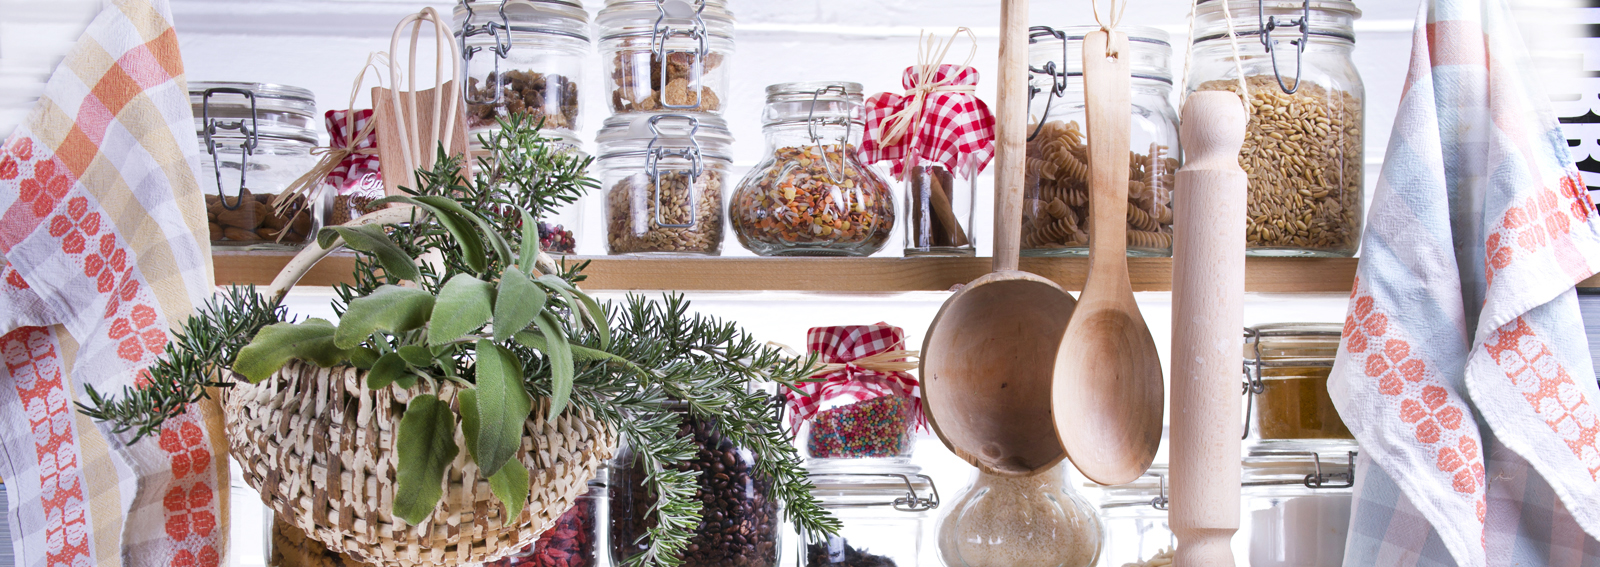 Dried foods stored in glass jars within a small pantry